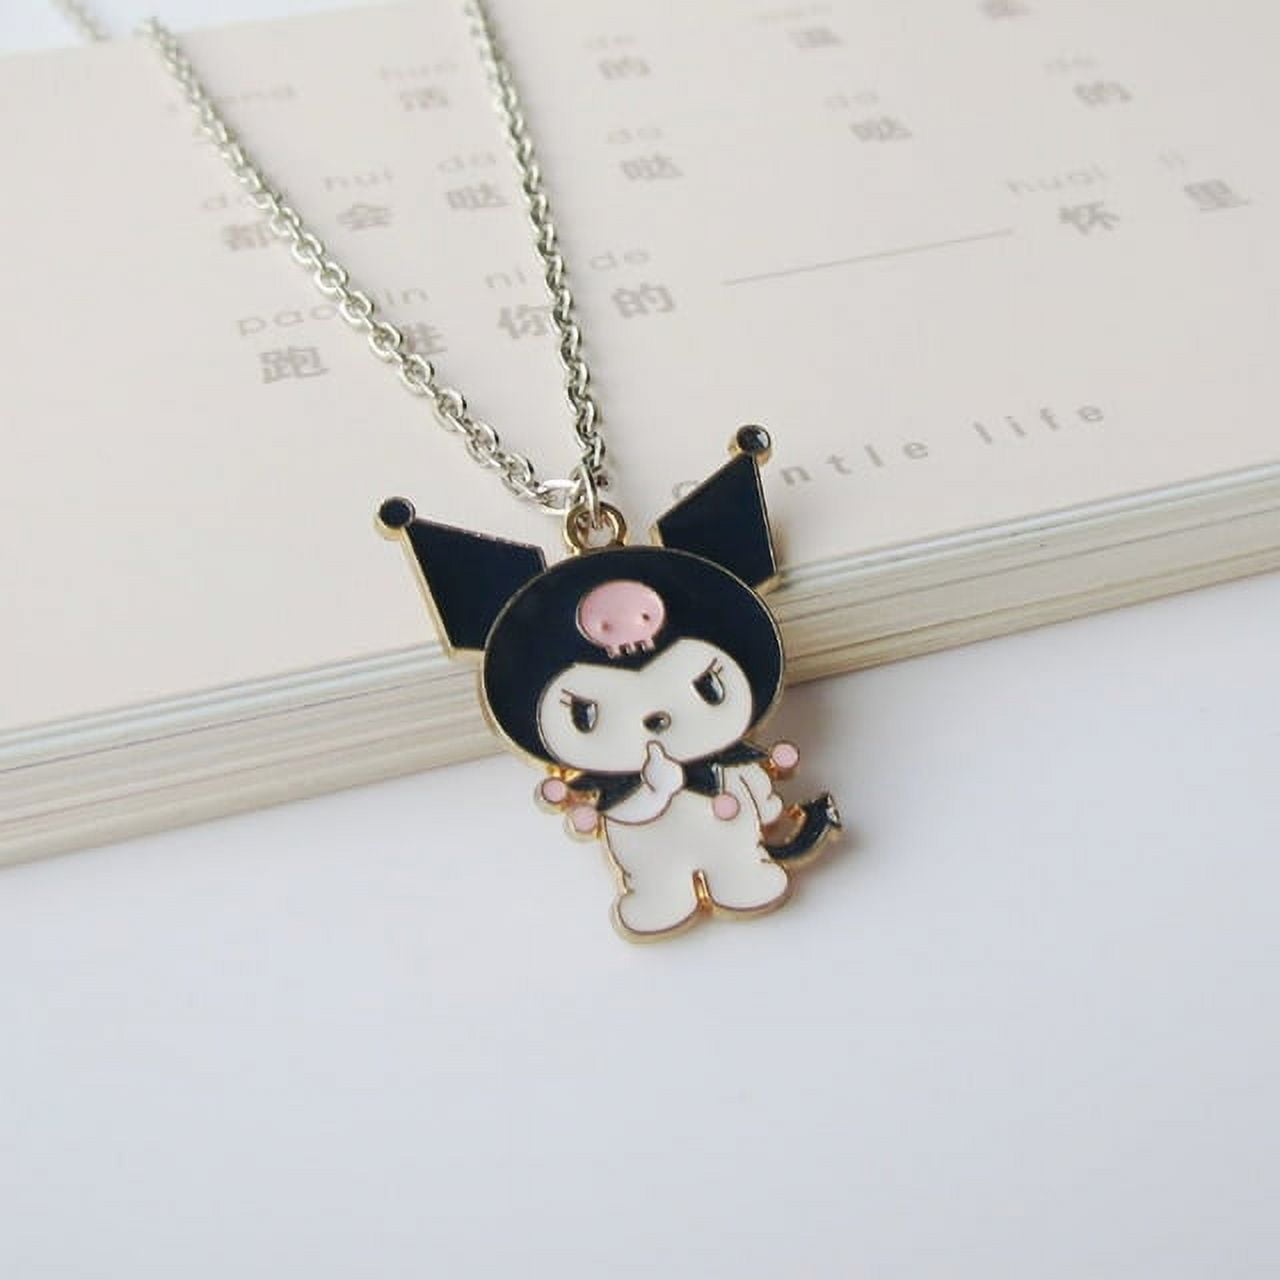 Buy Matching Sanrio Necklaces Set, My Melody and Kuromi, Kawaii Adorable  Unique Gift for Bestfriend/bffs/friendship/couples, Sanrio Girl Gift Online  in India - Etsy